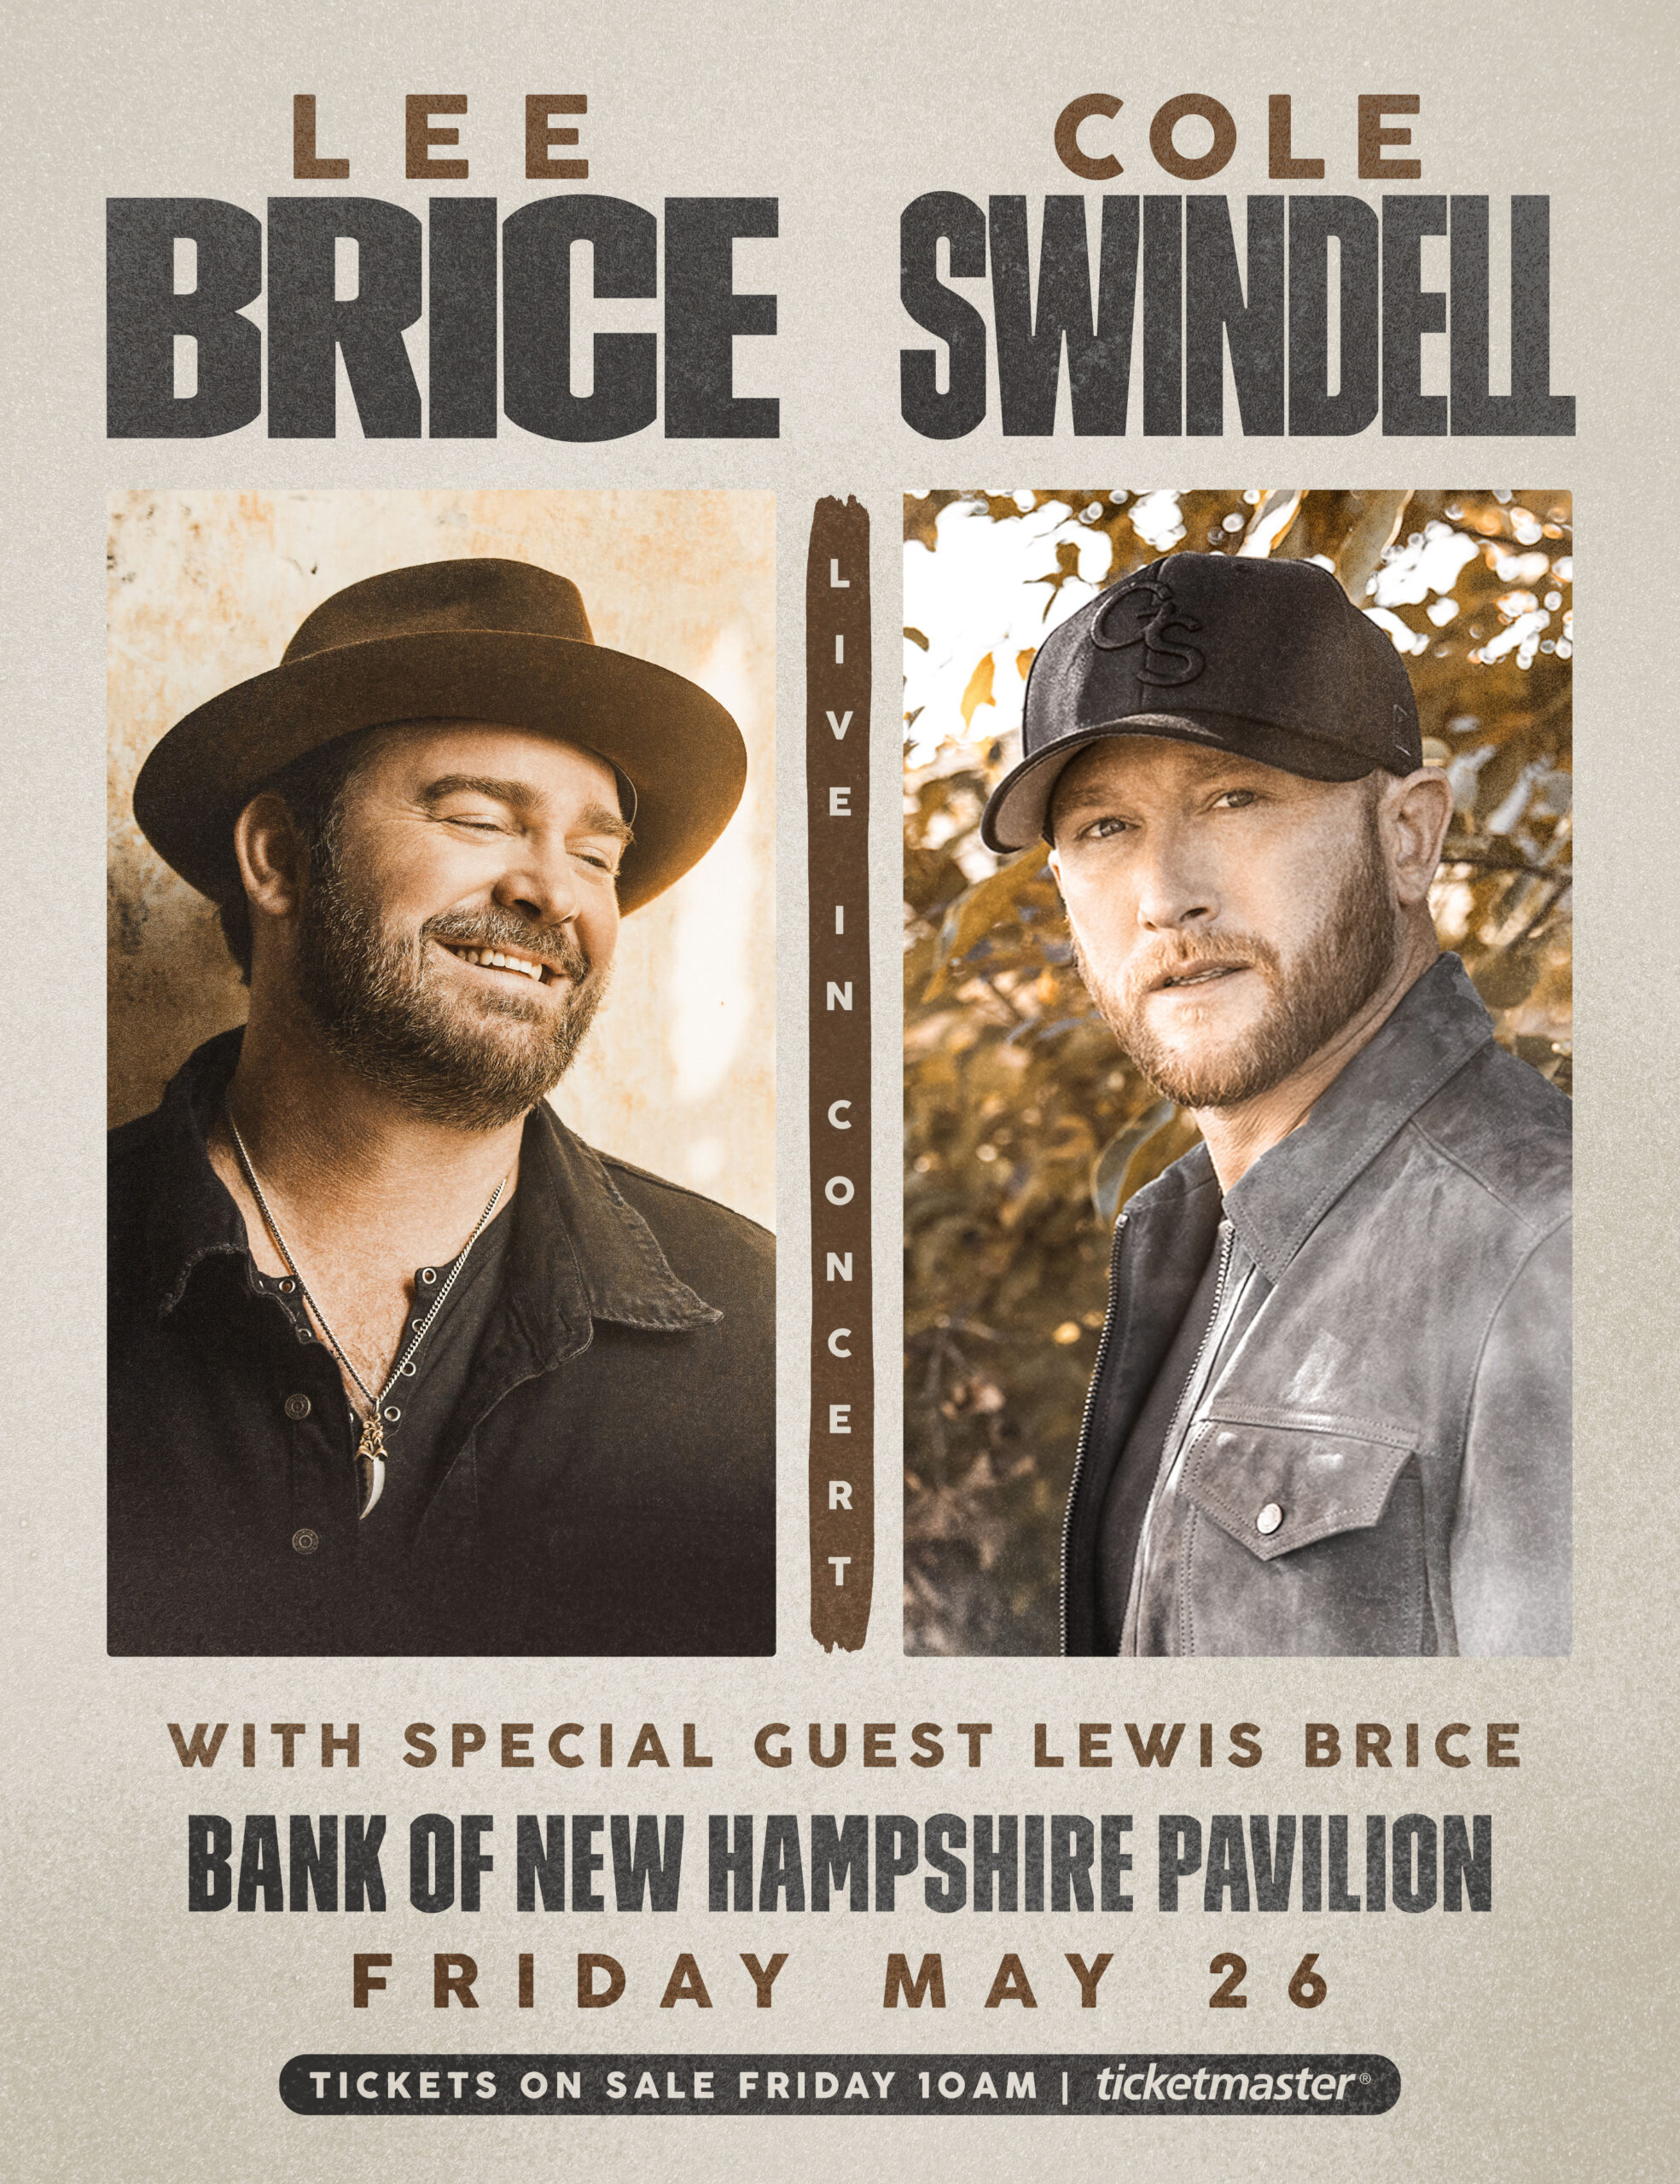 Win Tickets to Lee Brice & Cole Swindell!